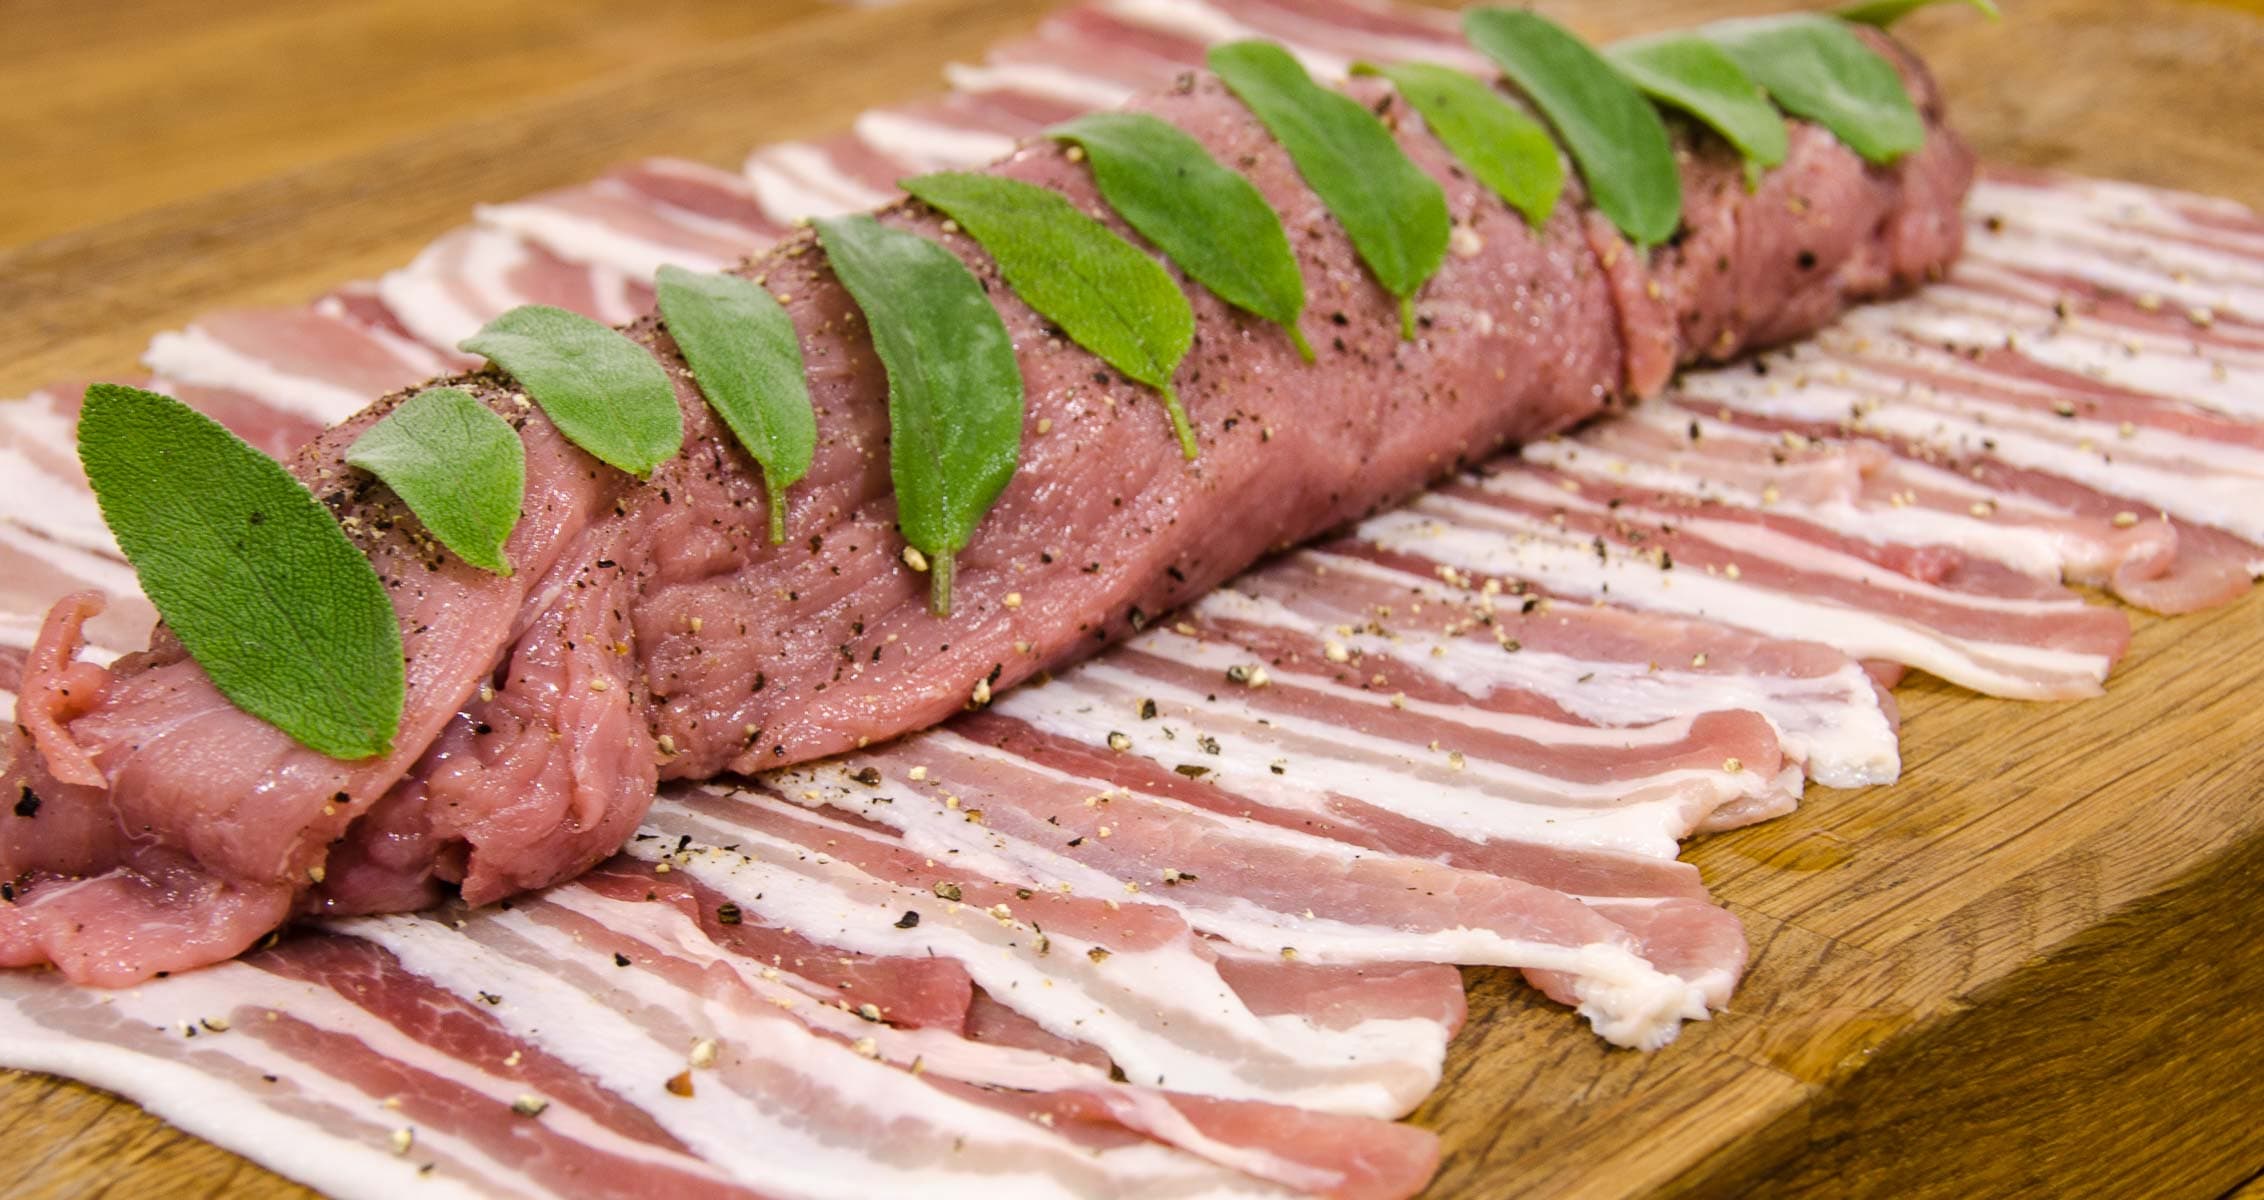 A layer of bacon strips topped with seasoned pork fillet and sage leaves.